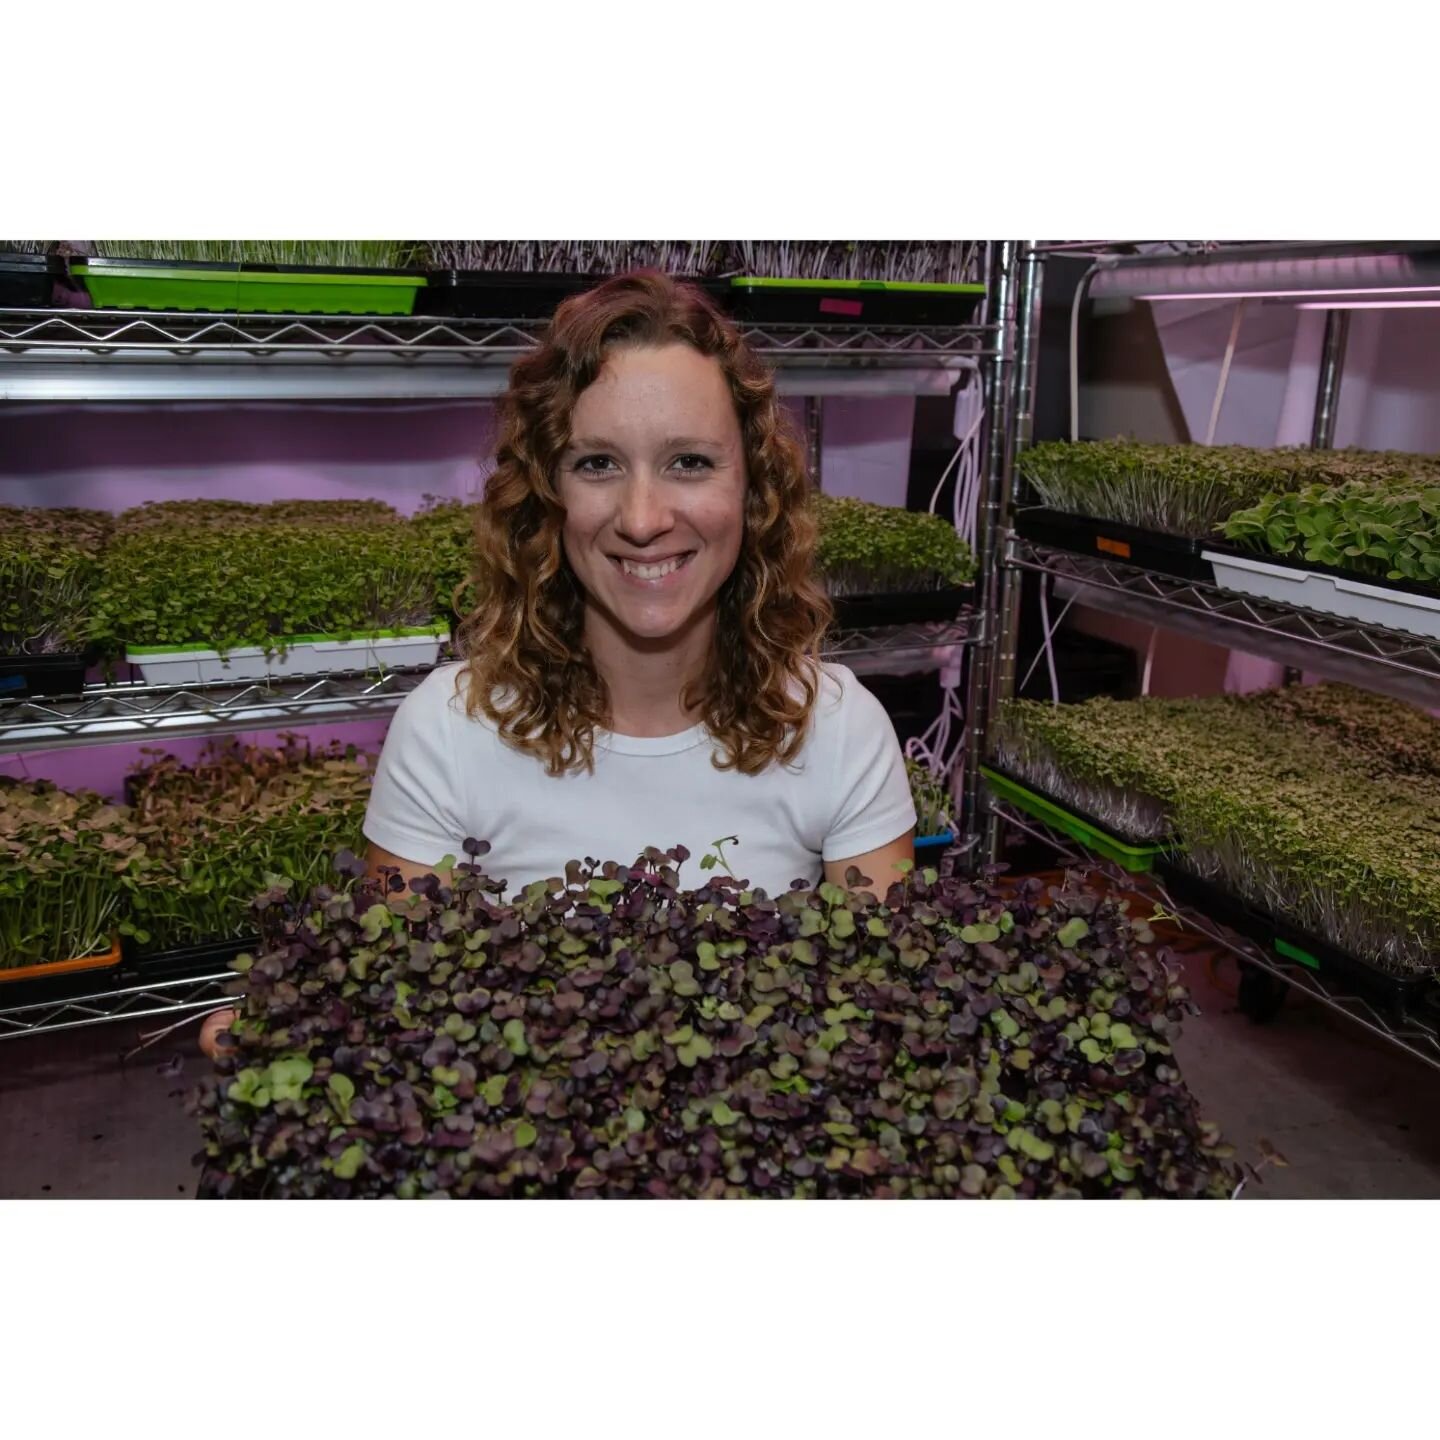 Urban farming right in the heart of New Braunfels! Check out @shookfarm for a variety of microgreens available for delivery and for purchase at @newbraunfelsfarmersmarket Thank you Sarah for allowing me to capture you and your yummy greens. 🌱
.
#mic